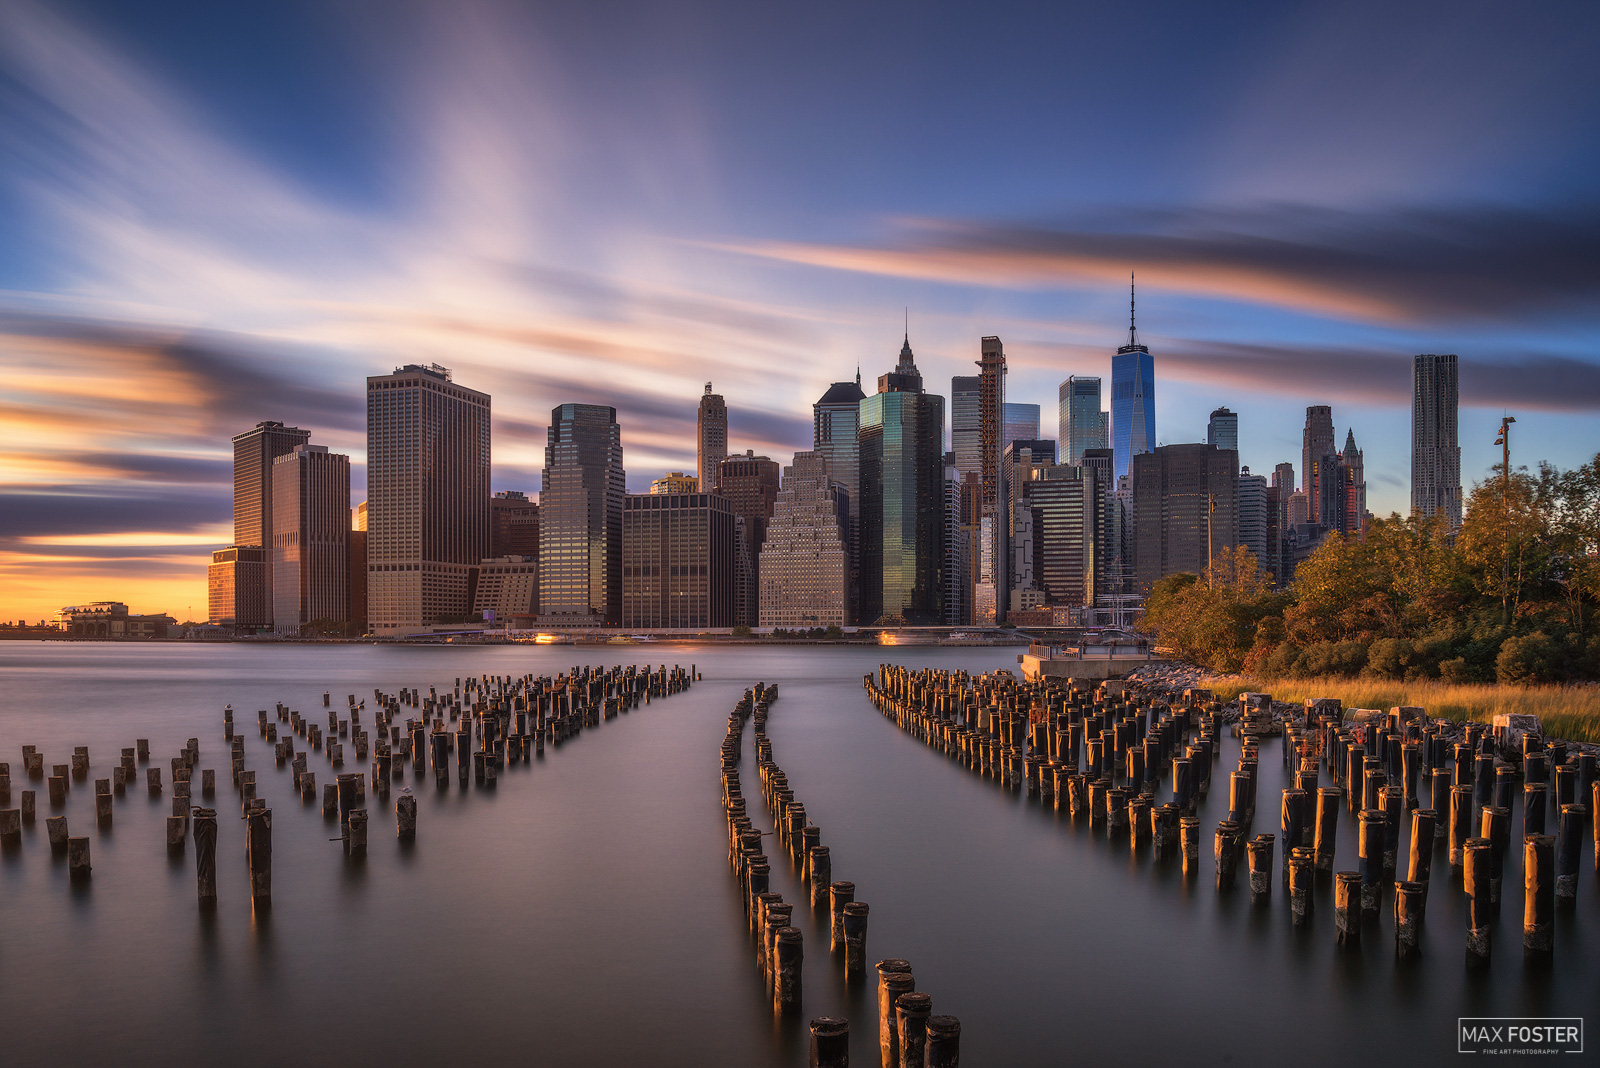 Bring your walls to life with New York Piers, Max Foster's limited edition photography print of the New York City Skyline in...